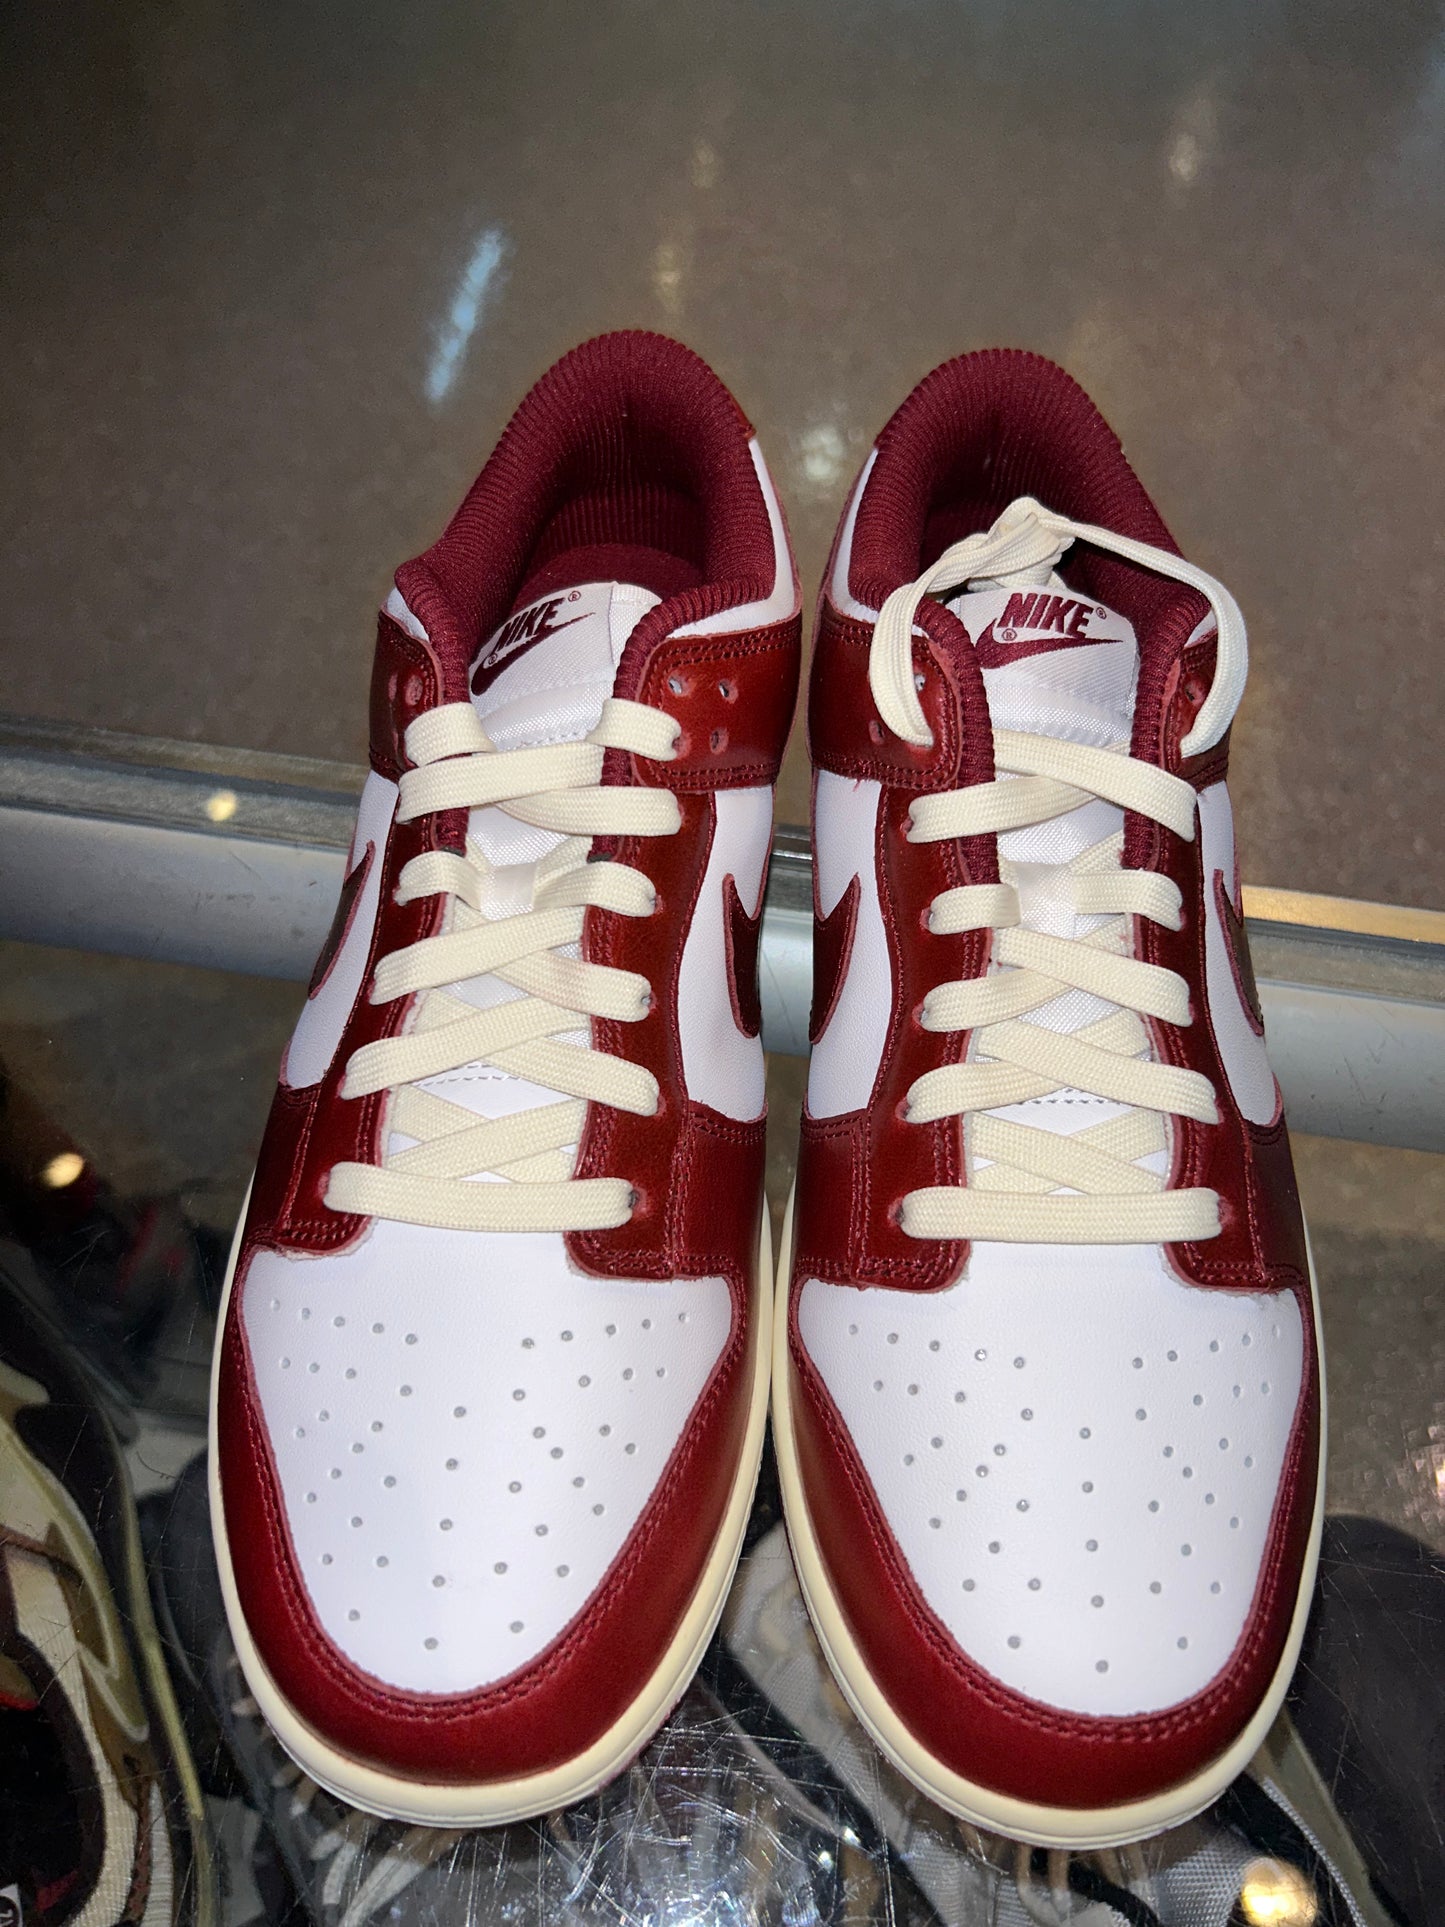 Size 8.5 (10W) Dunk Low “Team Red” Brand New (Mall)